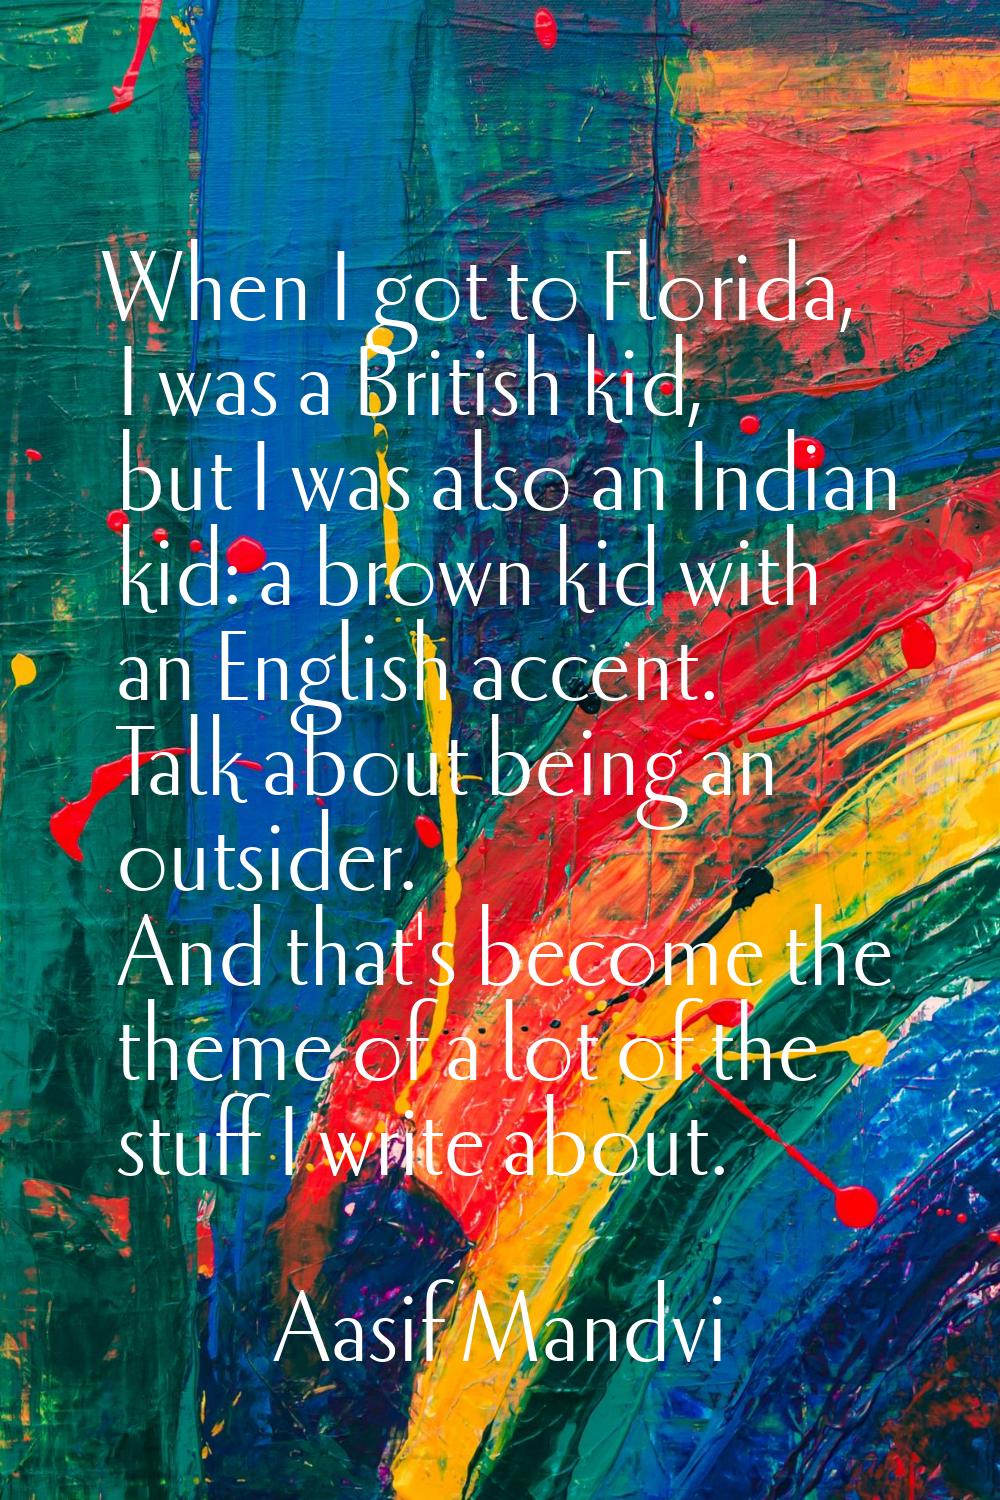 When I got to Florida, I was a British kid, but I was also an Indian kid: a brown kid with an Engli